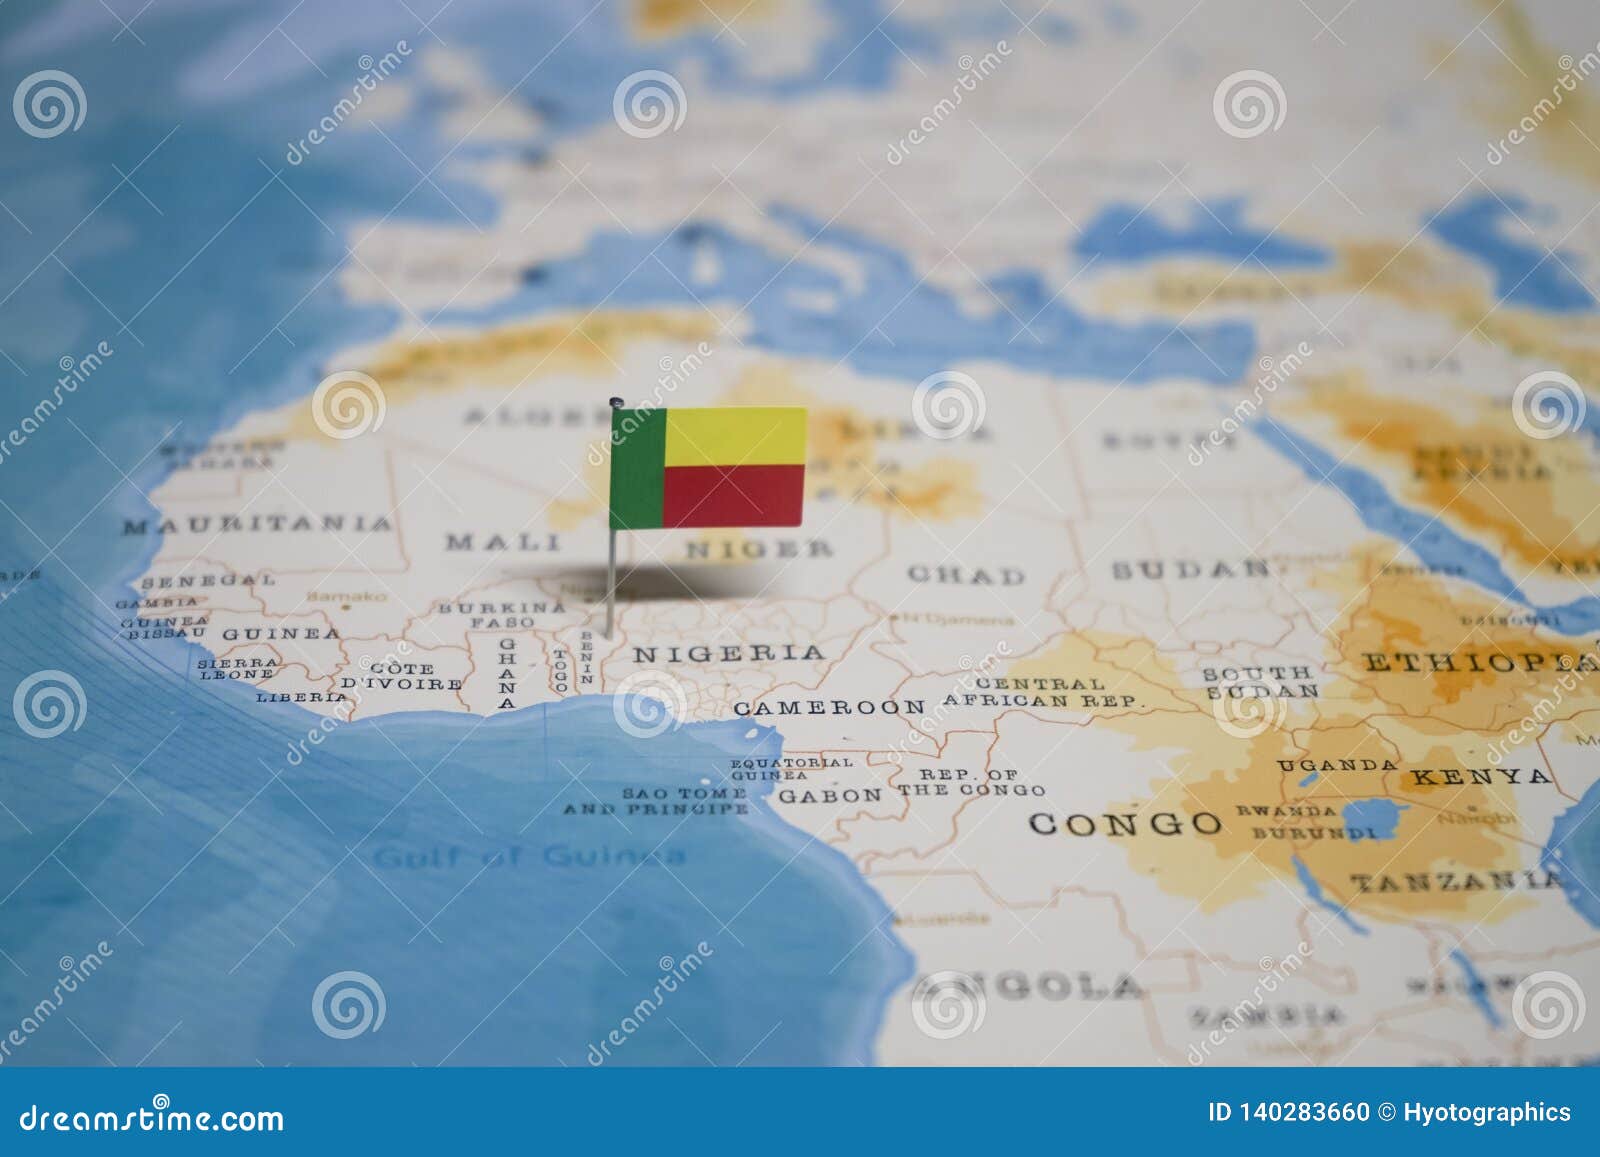 The Flag Of Benin In The World Map Stock Photo Image Of Location